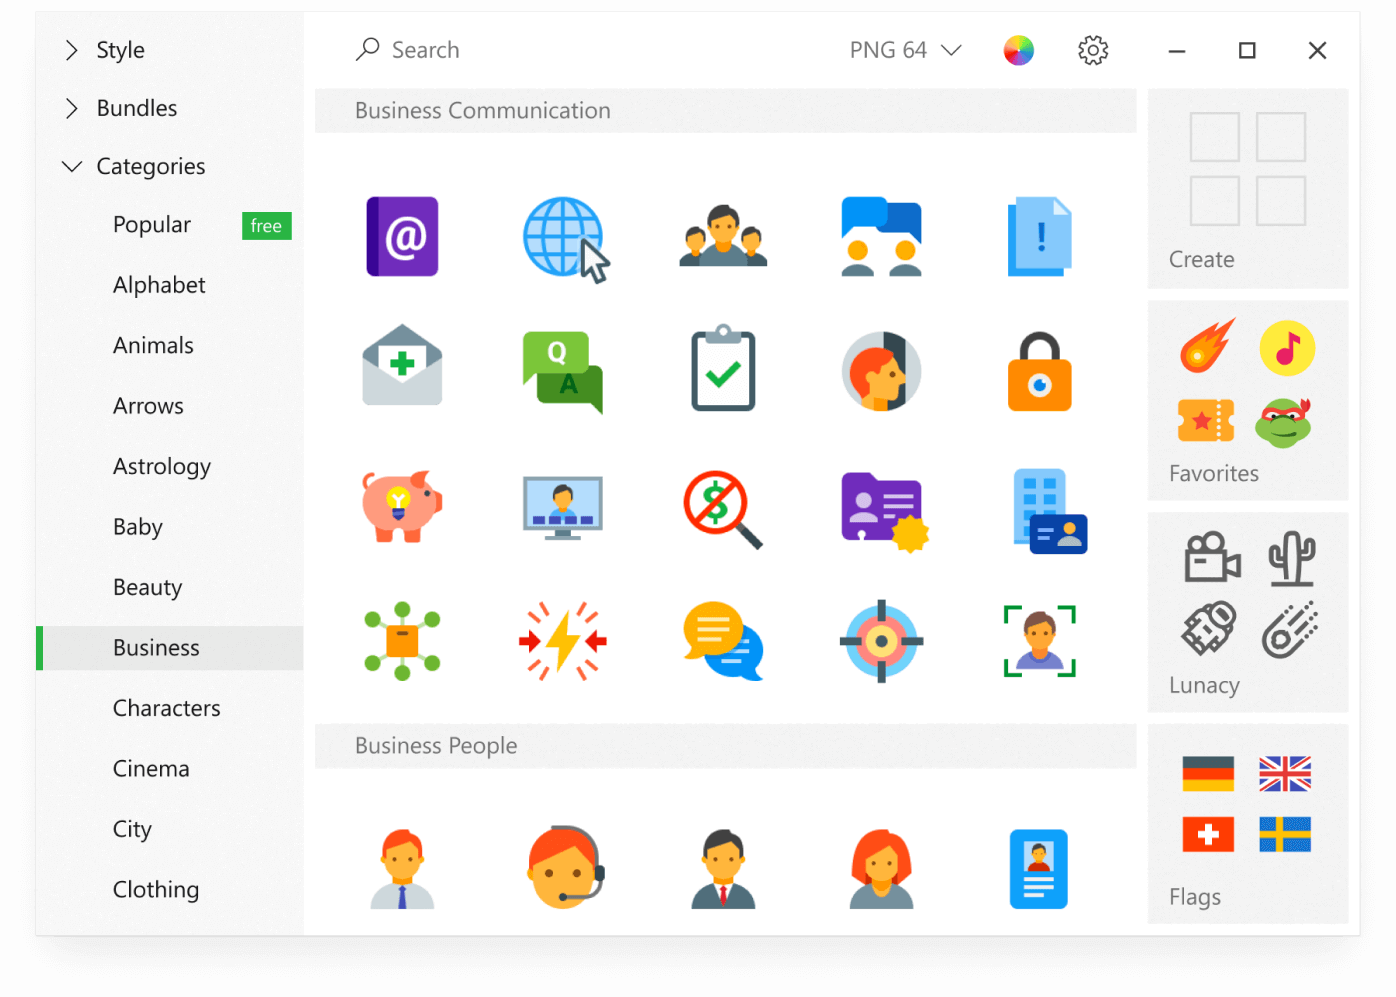 The application resides in status bar and contains 135k free icons for developers and designers. Works offline. Allows to re-color and re-size the icons.